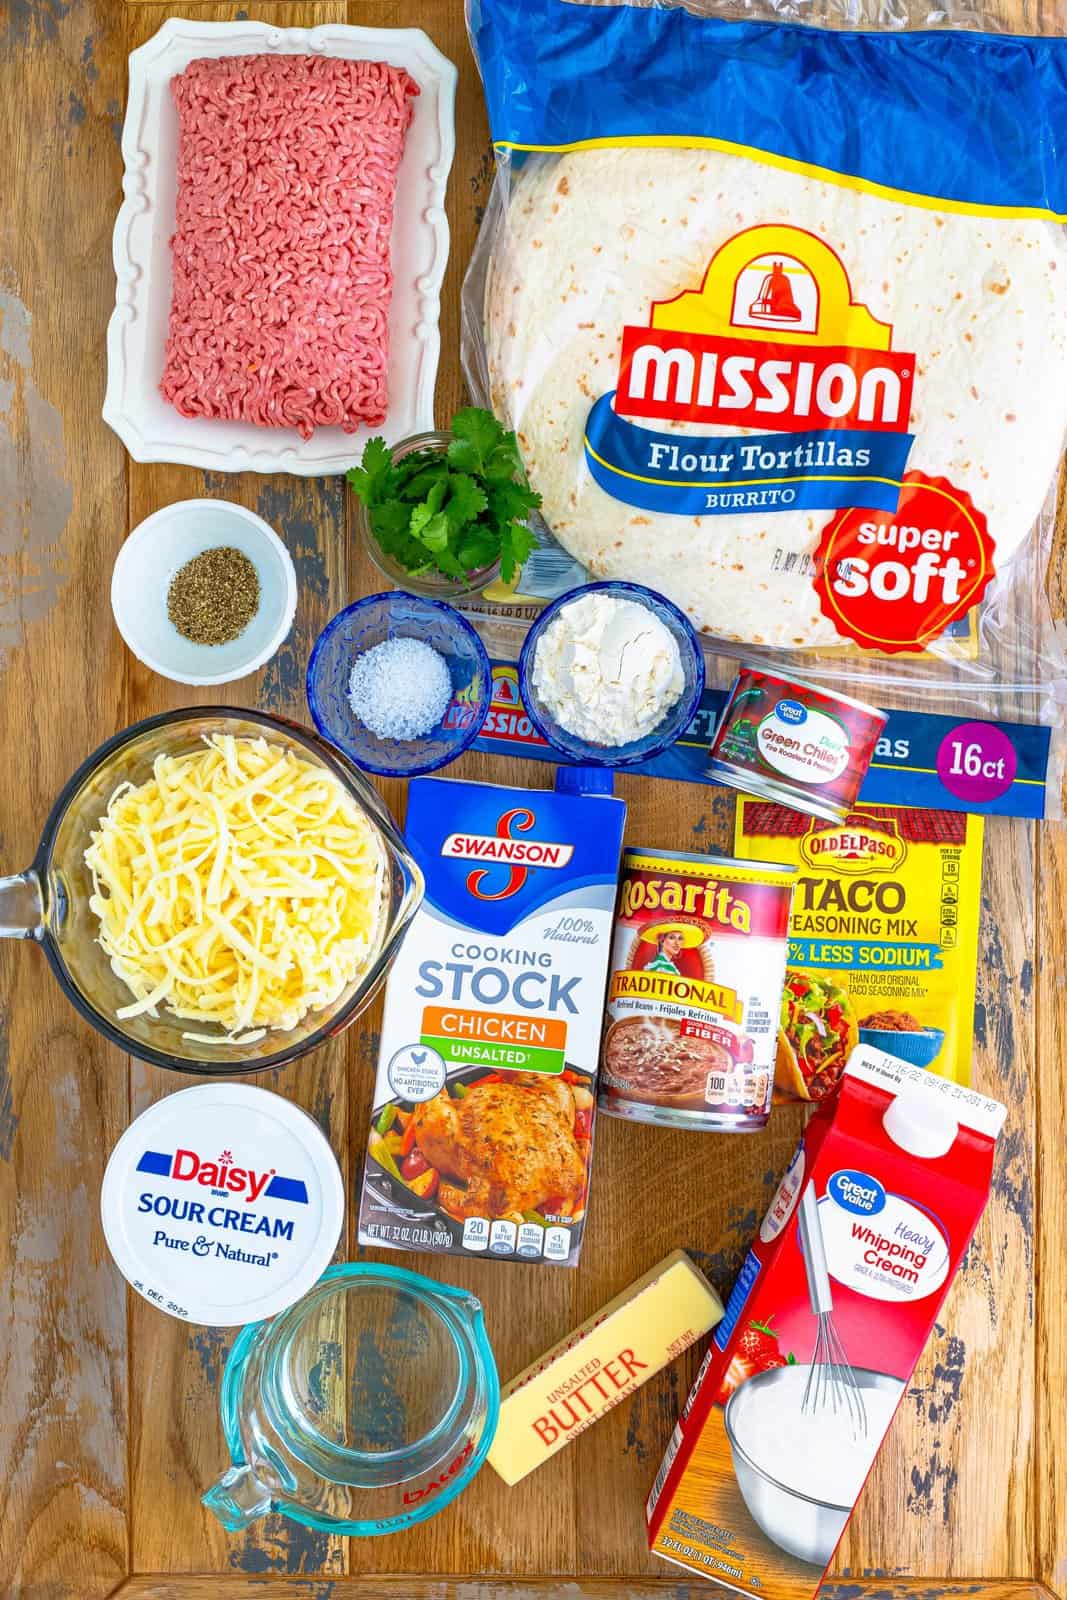 Ingredients needed: lean ground beef, taco seasoning, water, refried beans, Monterey Jack cheese, unsalted butter, all-purpose flour, unsalted chicken stock, heavy cream, diced green chiles, sour cream, kosher salt, pepper, burrito-sized tortillas and fresh chopped cilantro.